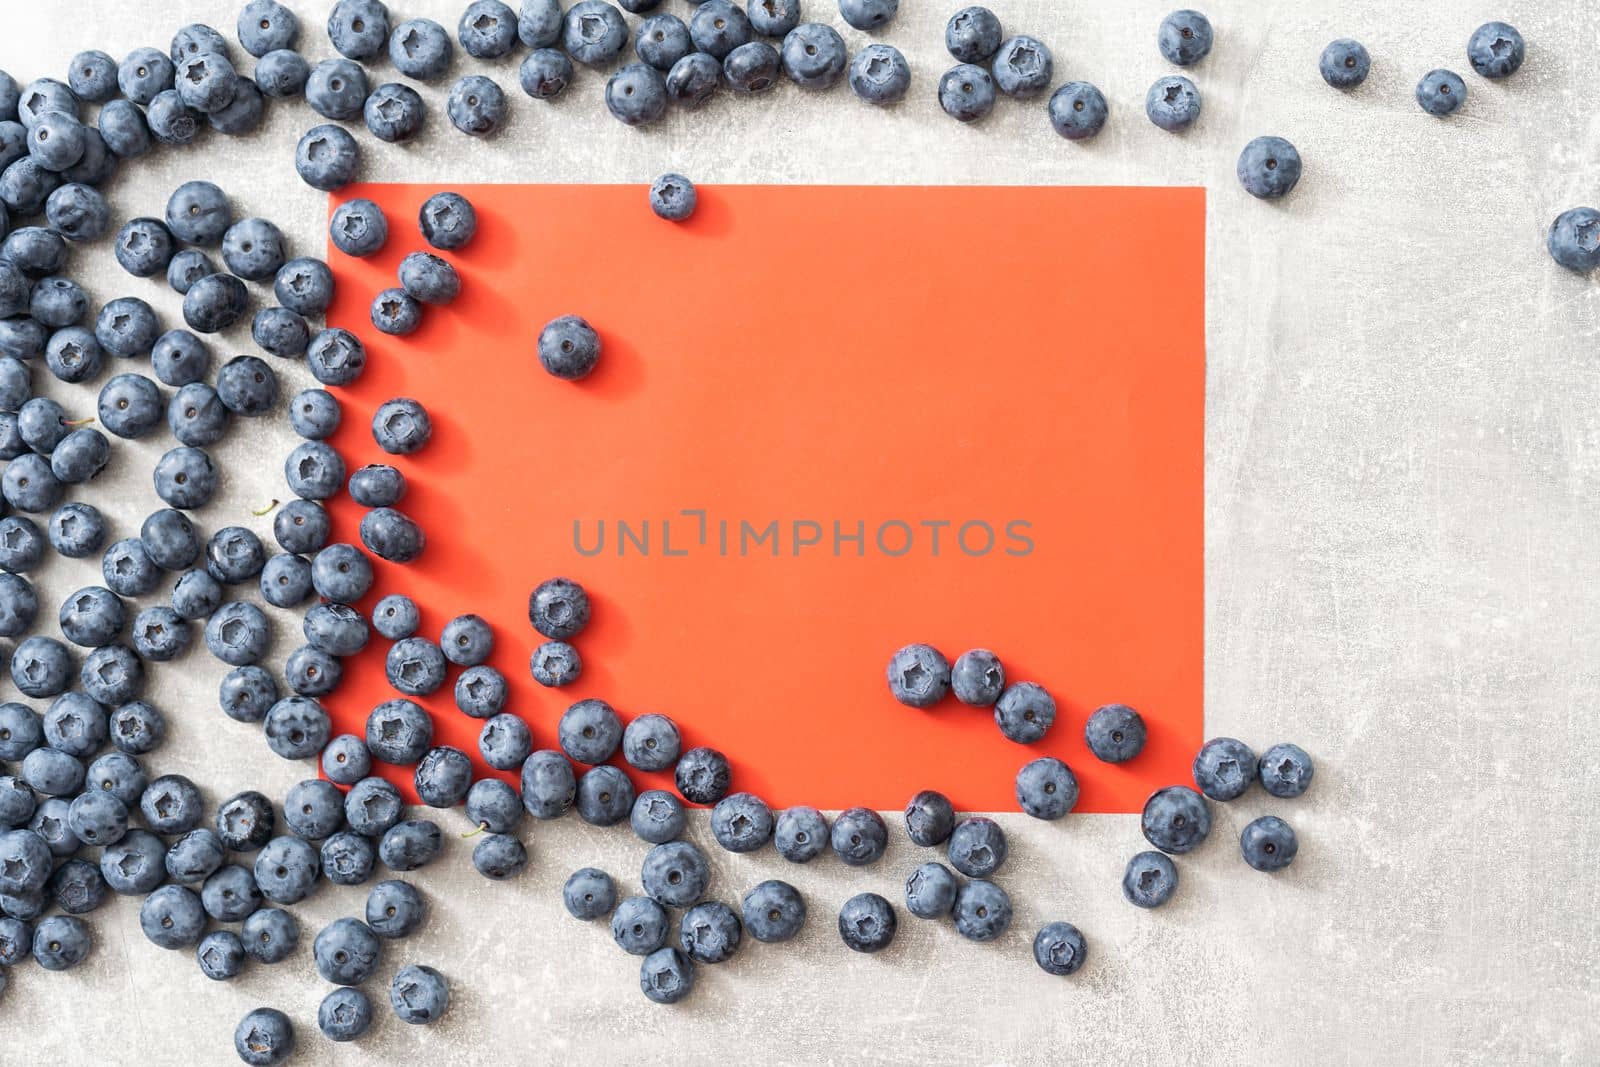 large blueberry on a red background.